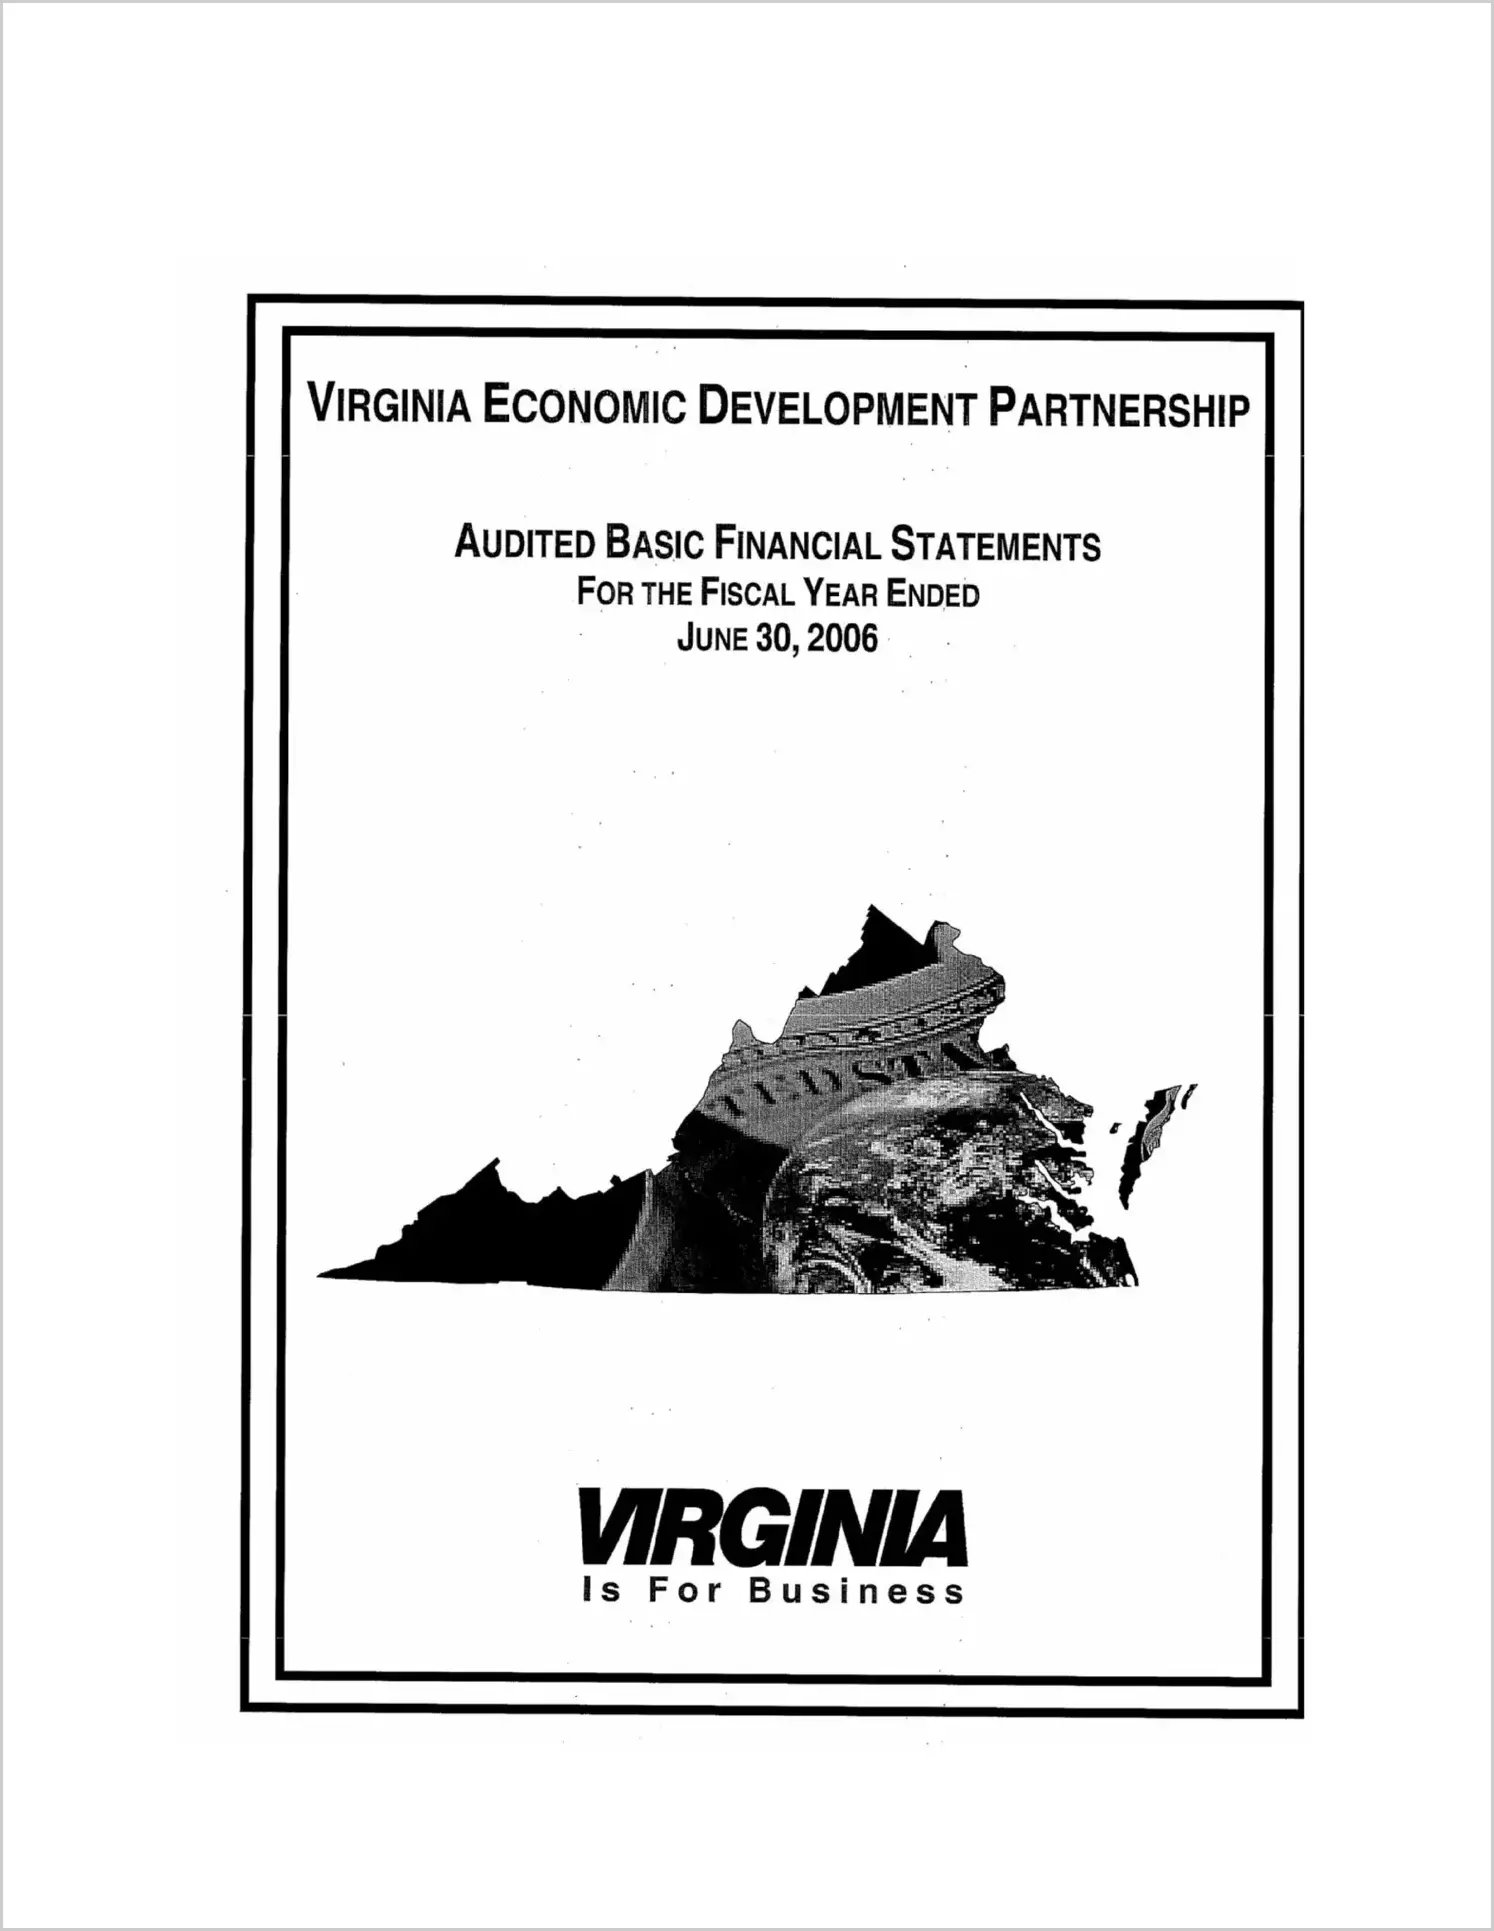 Virginia Economic Development Partnership Audited Basic Financial Statements for the fiscal year ended June 30, 2006